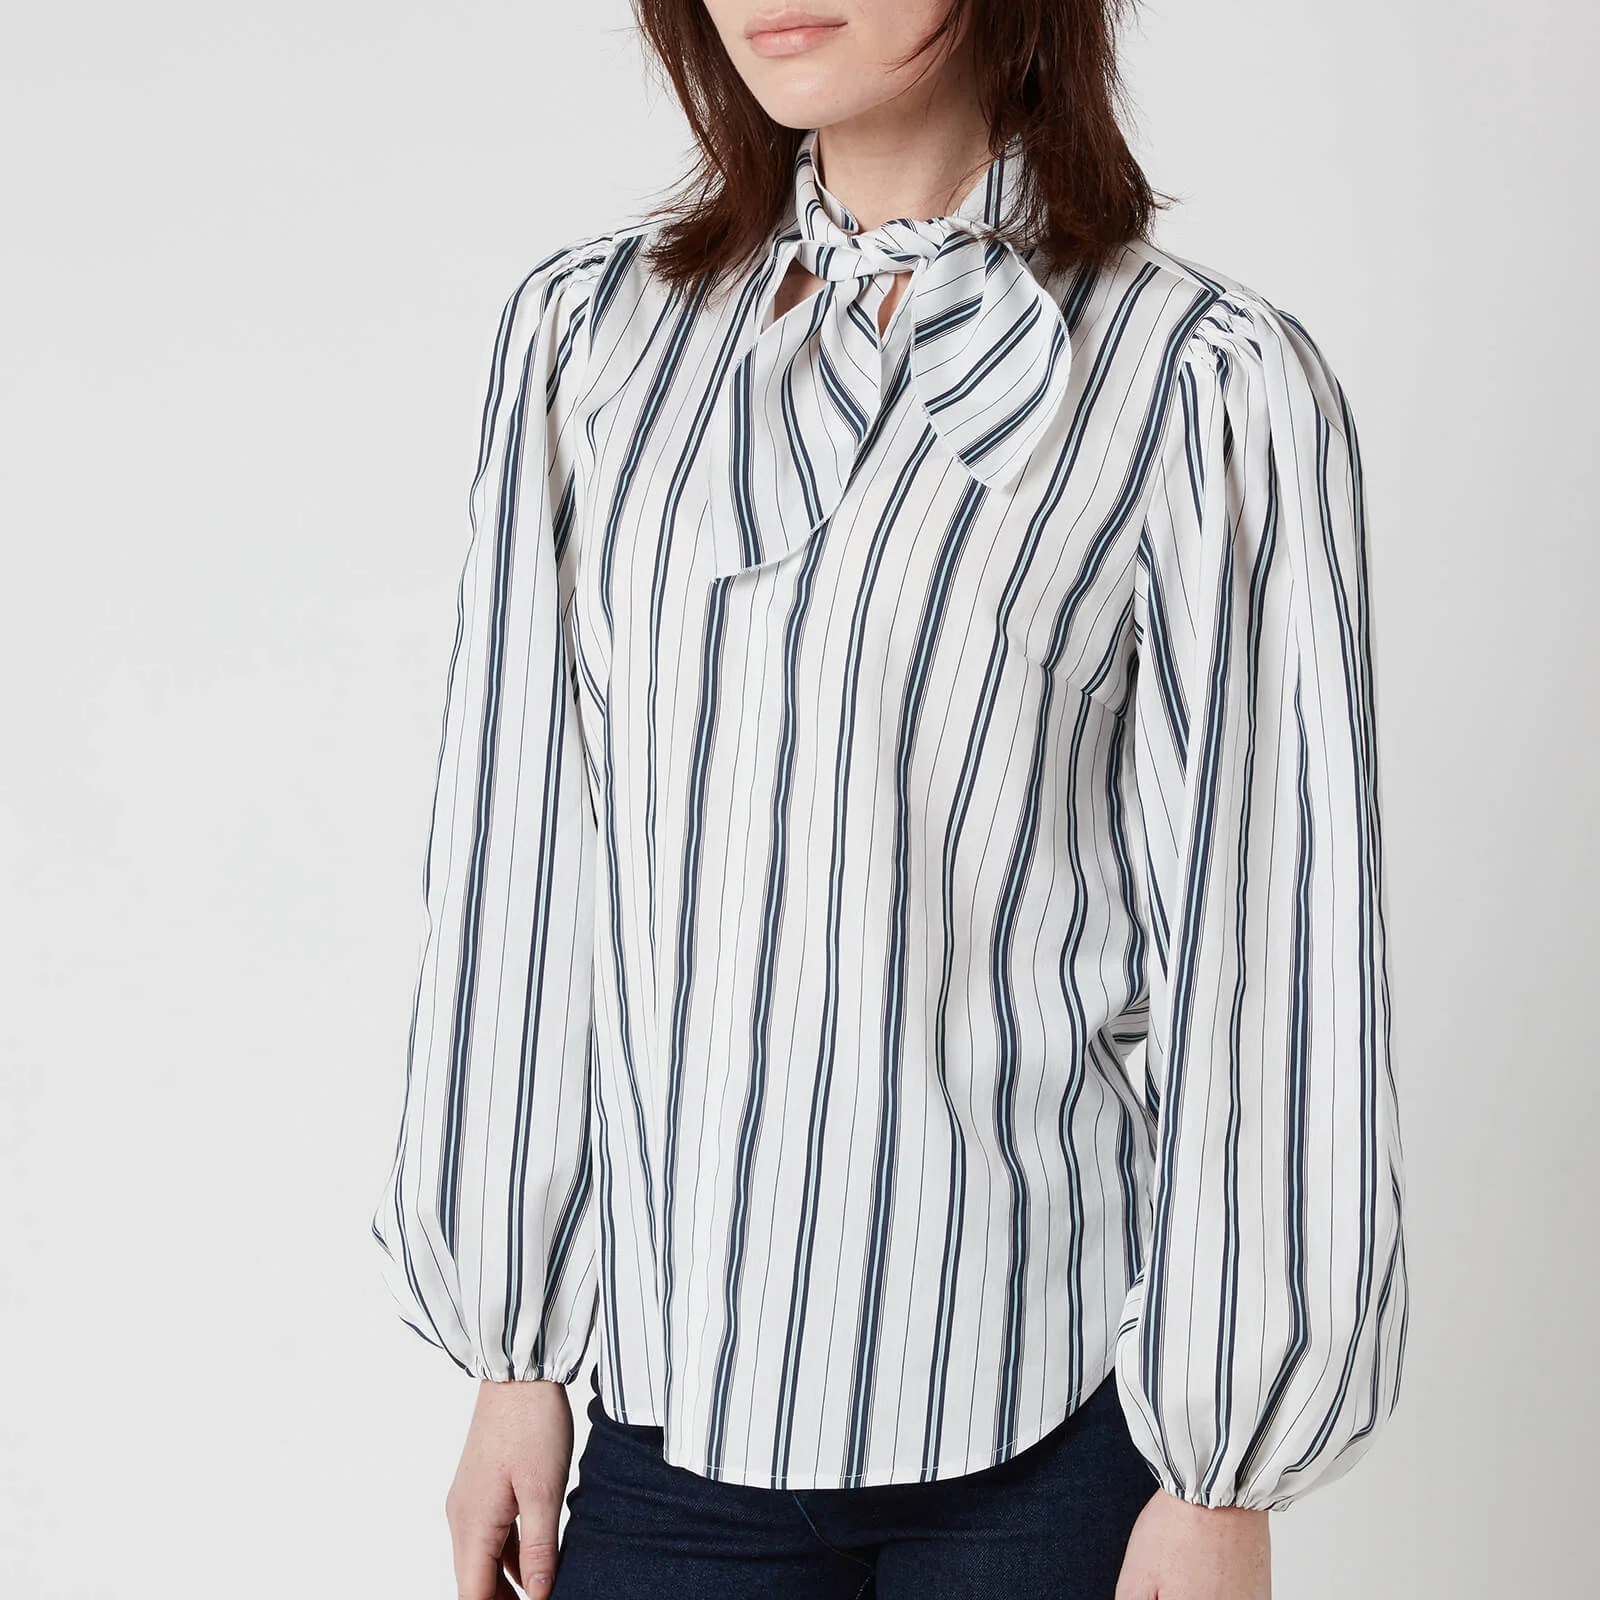 See by Chloé Women's Tie Neck Striped Shirt - White Blue Image 1